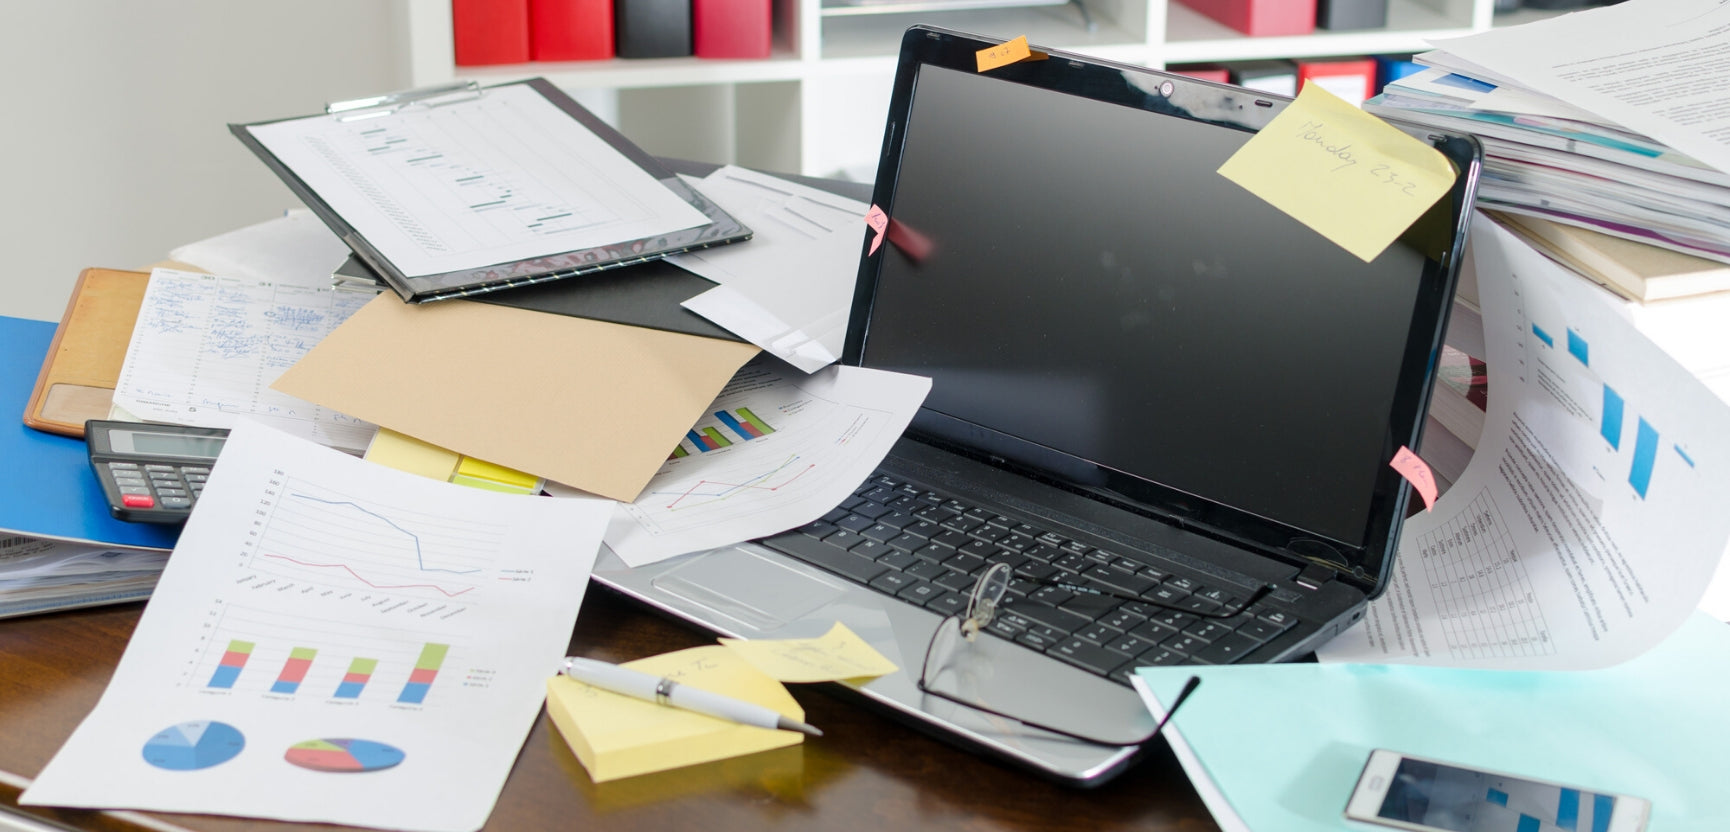 How Desk Clutter Can Decrease Your Productivity